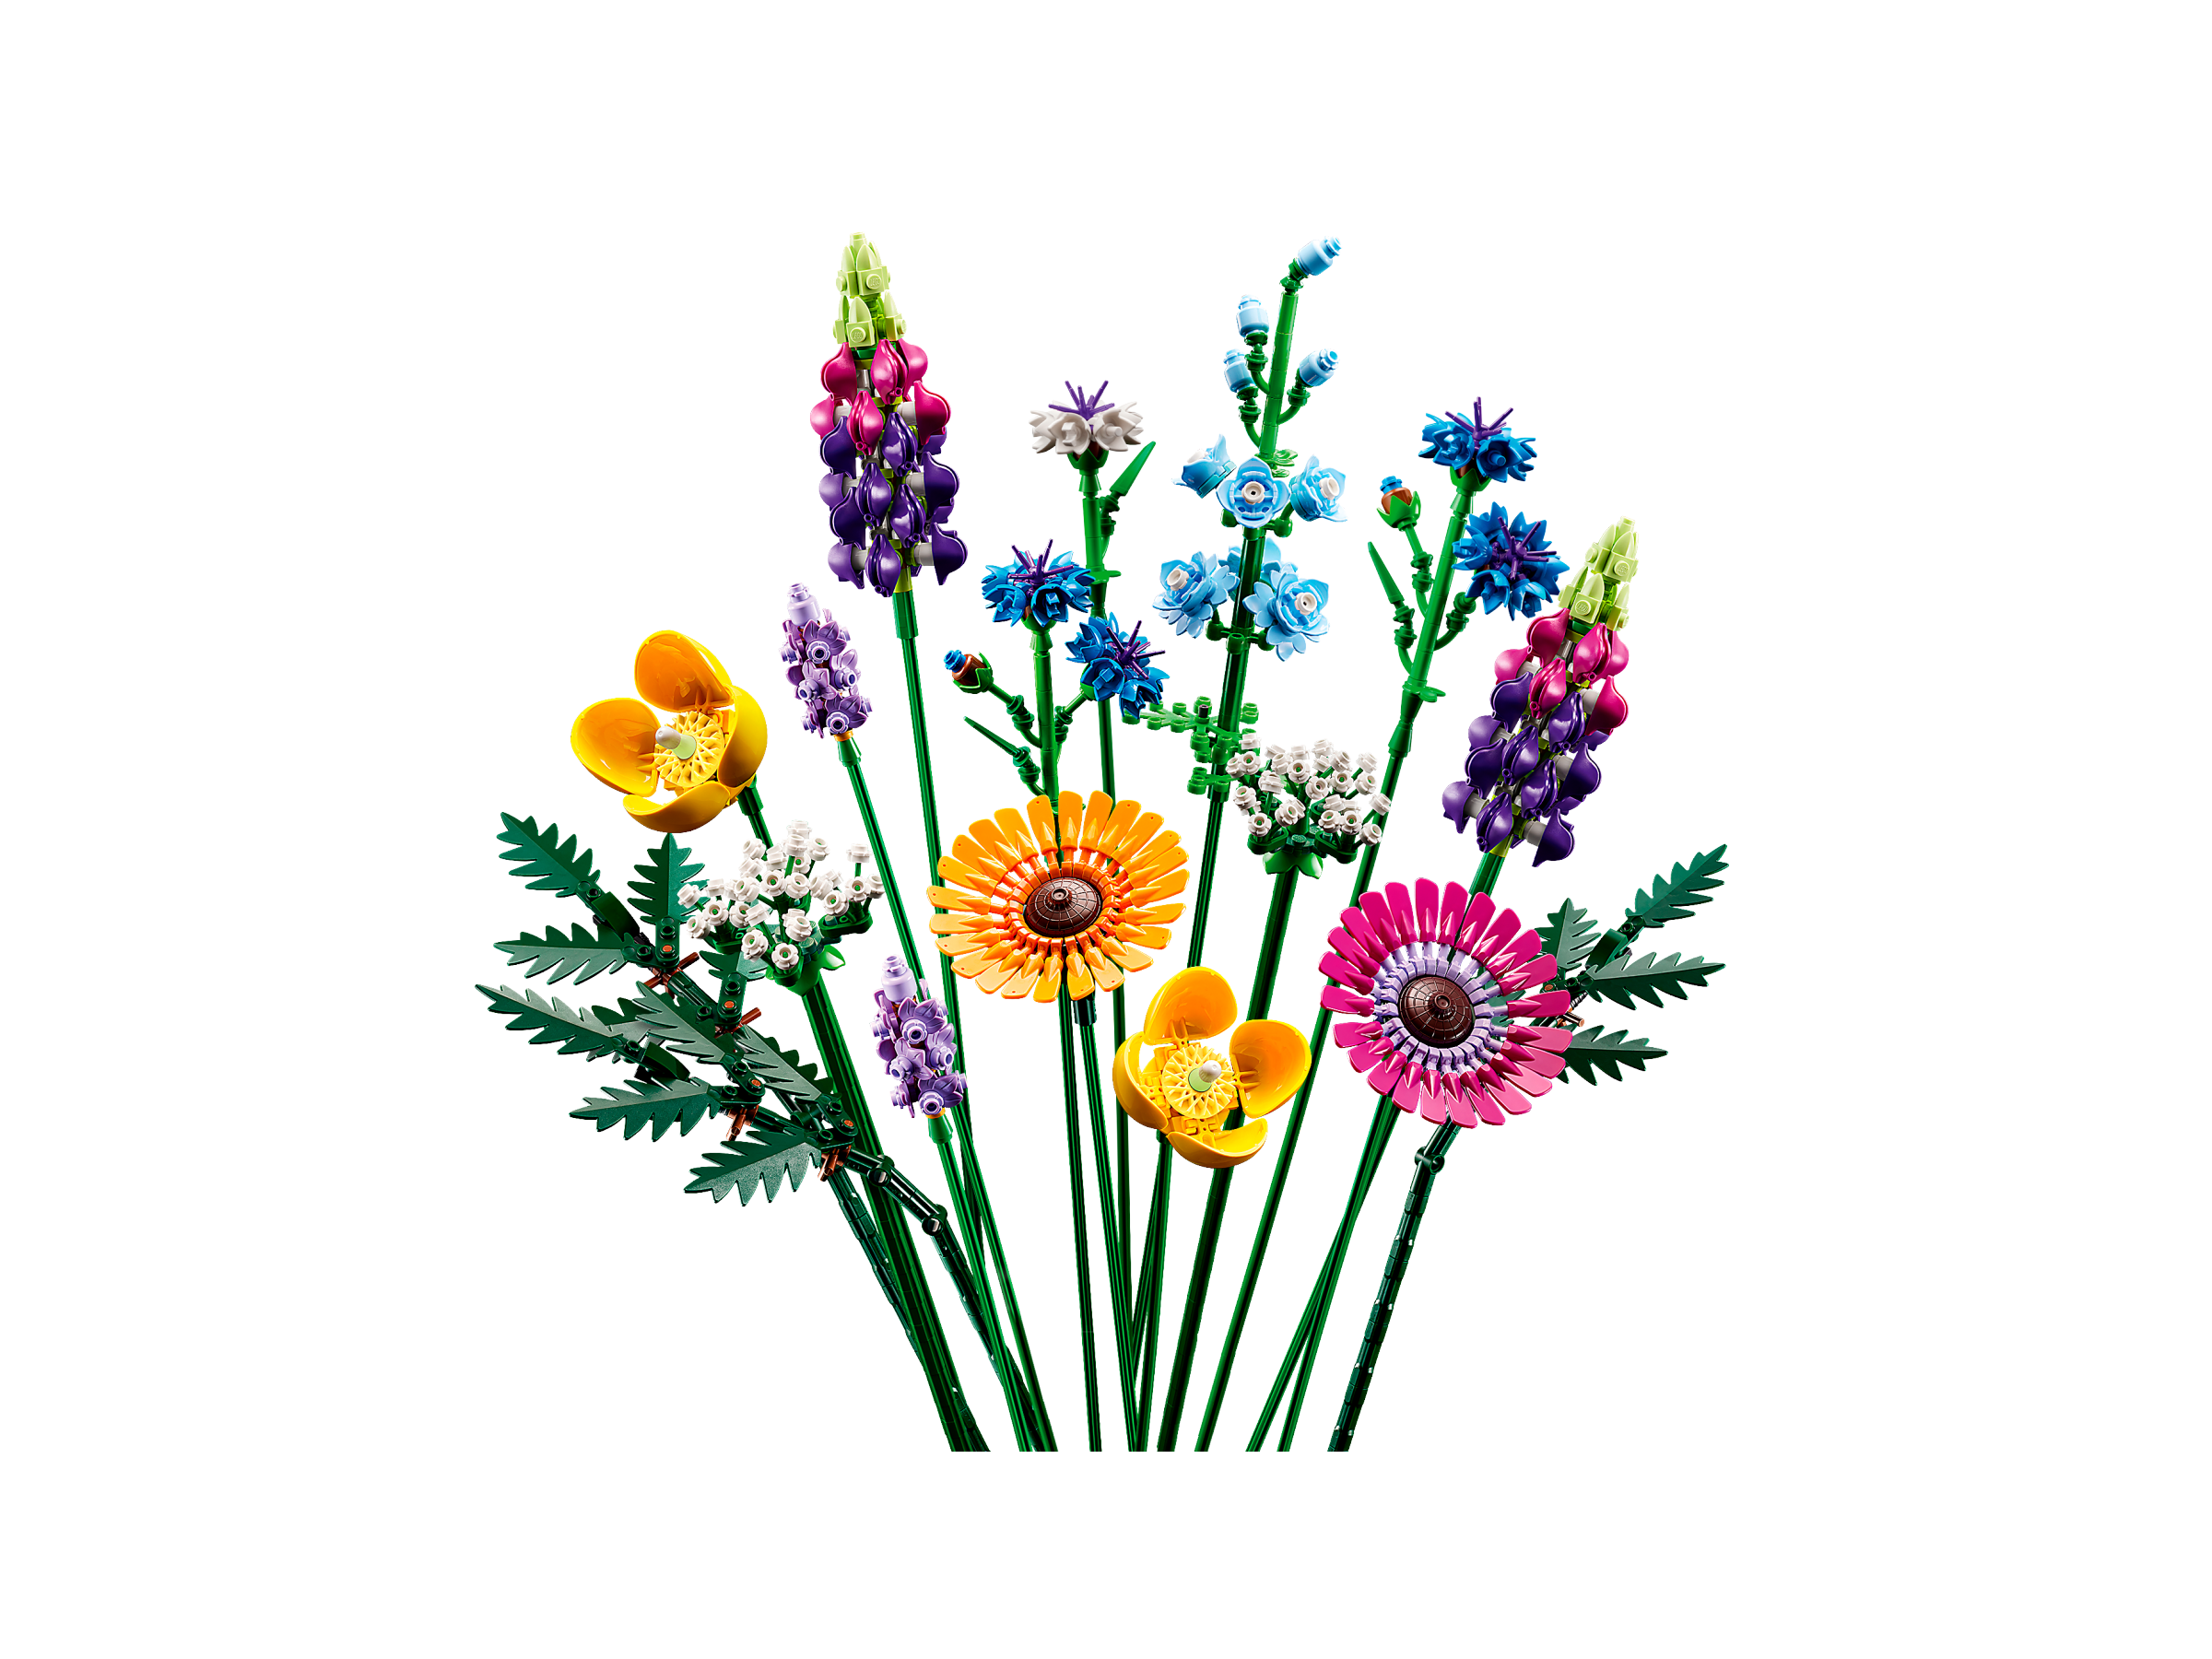 Wildflower Bouquet 10313, The Botanical Collection